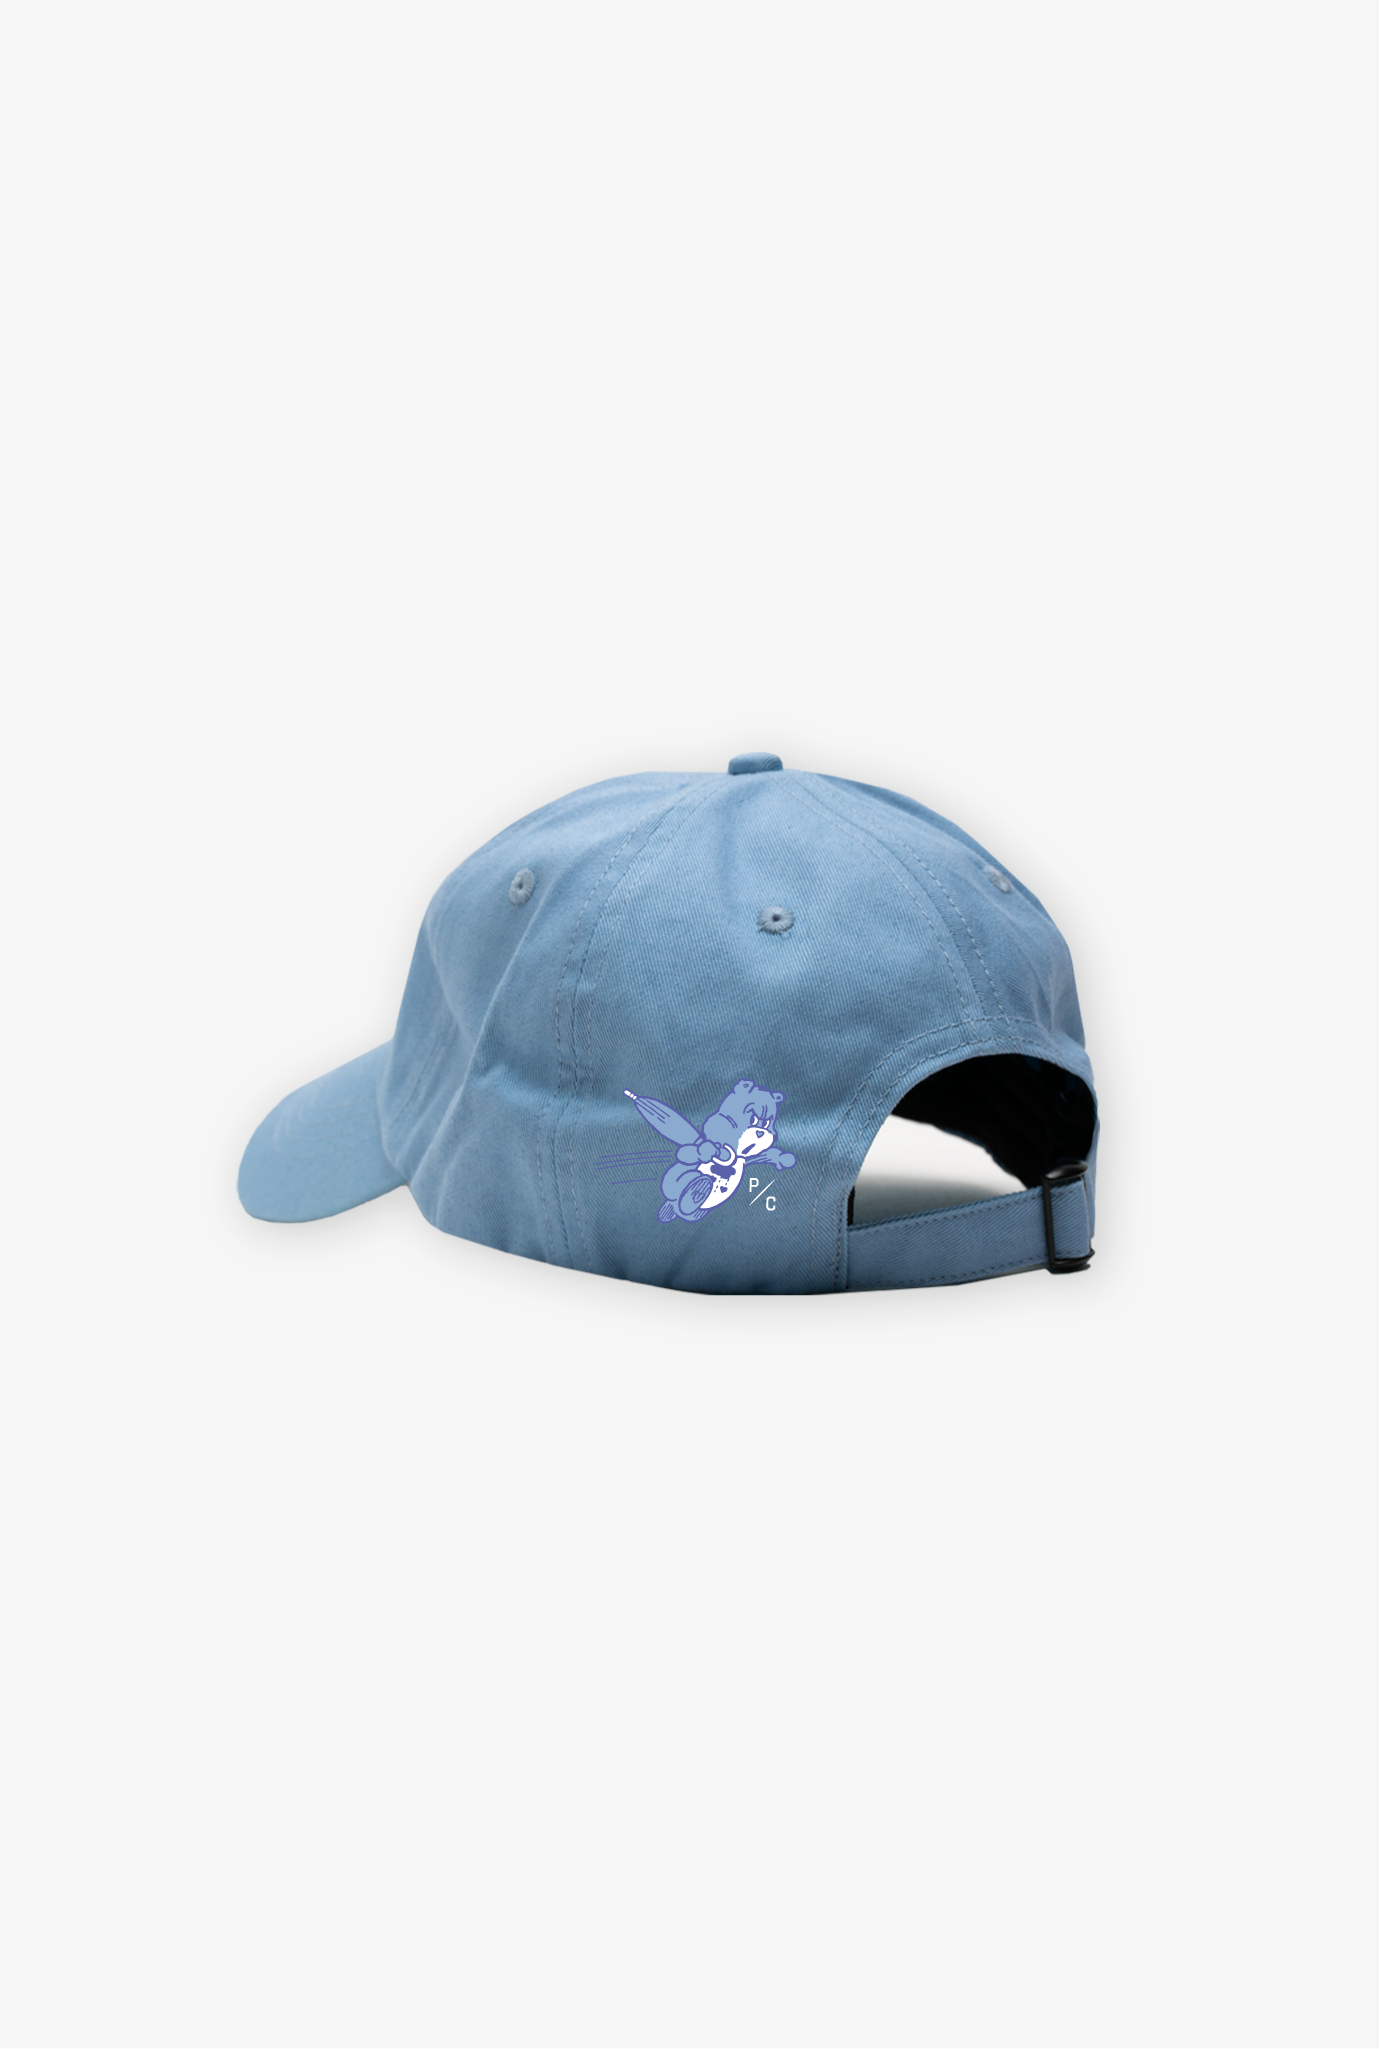 Don't Feel Bad About Feeling Dad Cap - Vista Blue